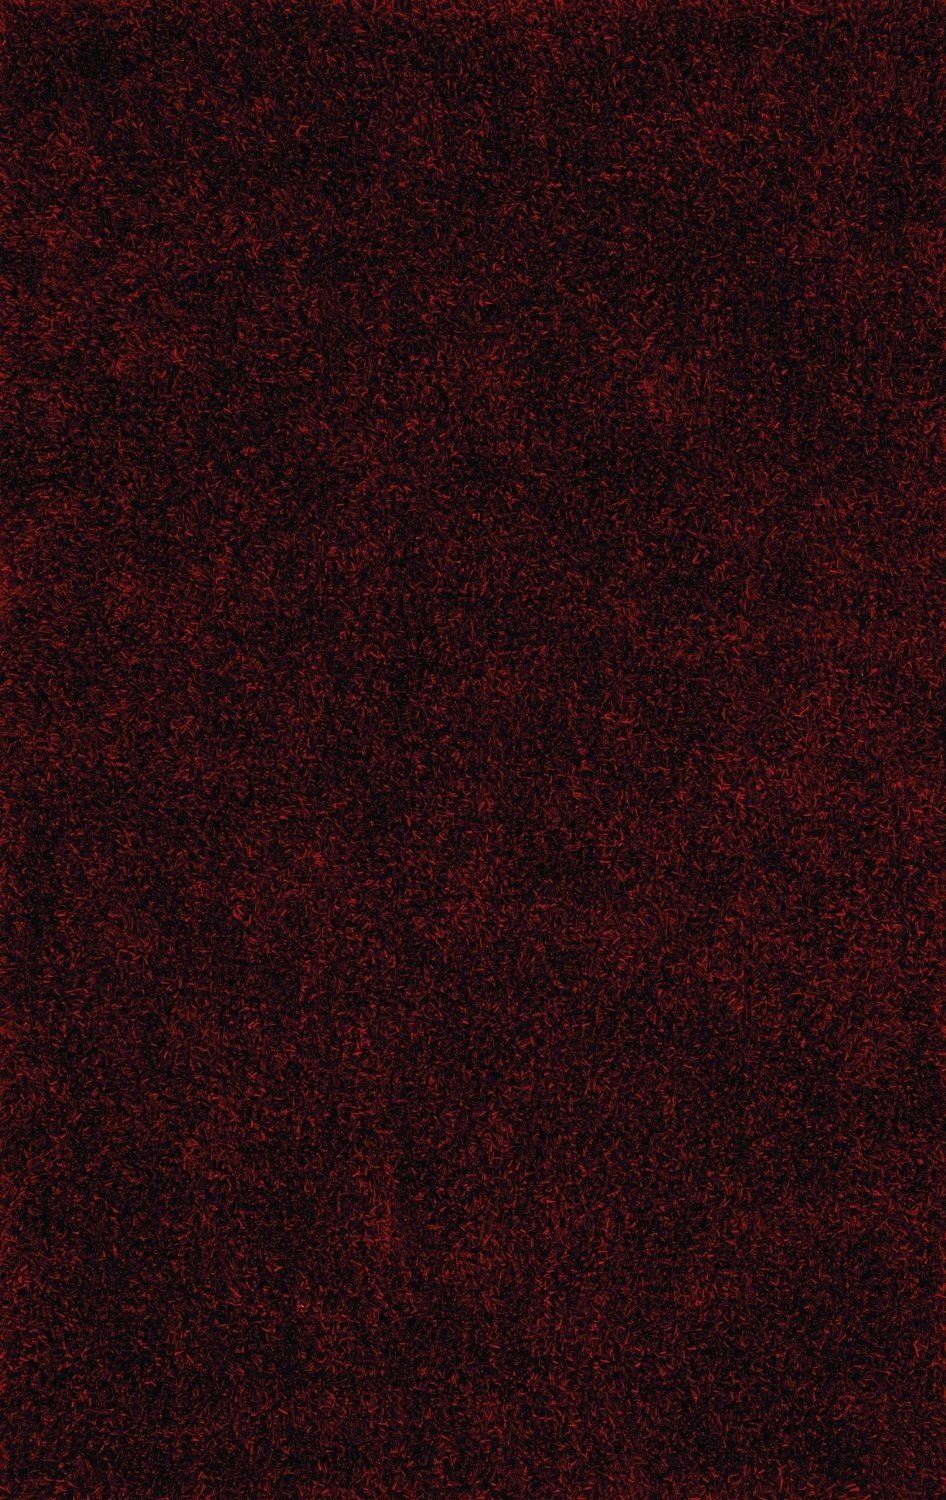 Illusions Collection - 8 x 10 - Burgundy